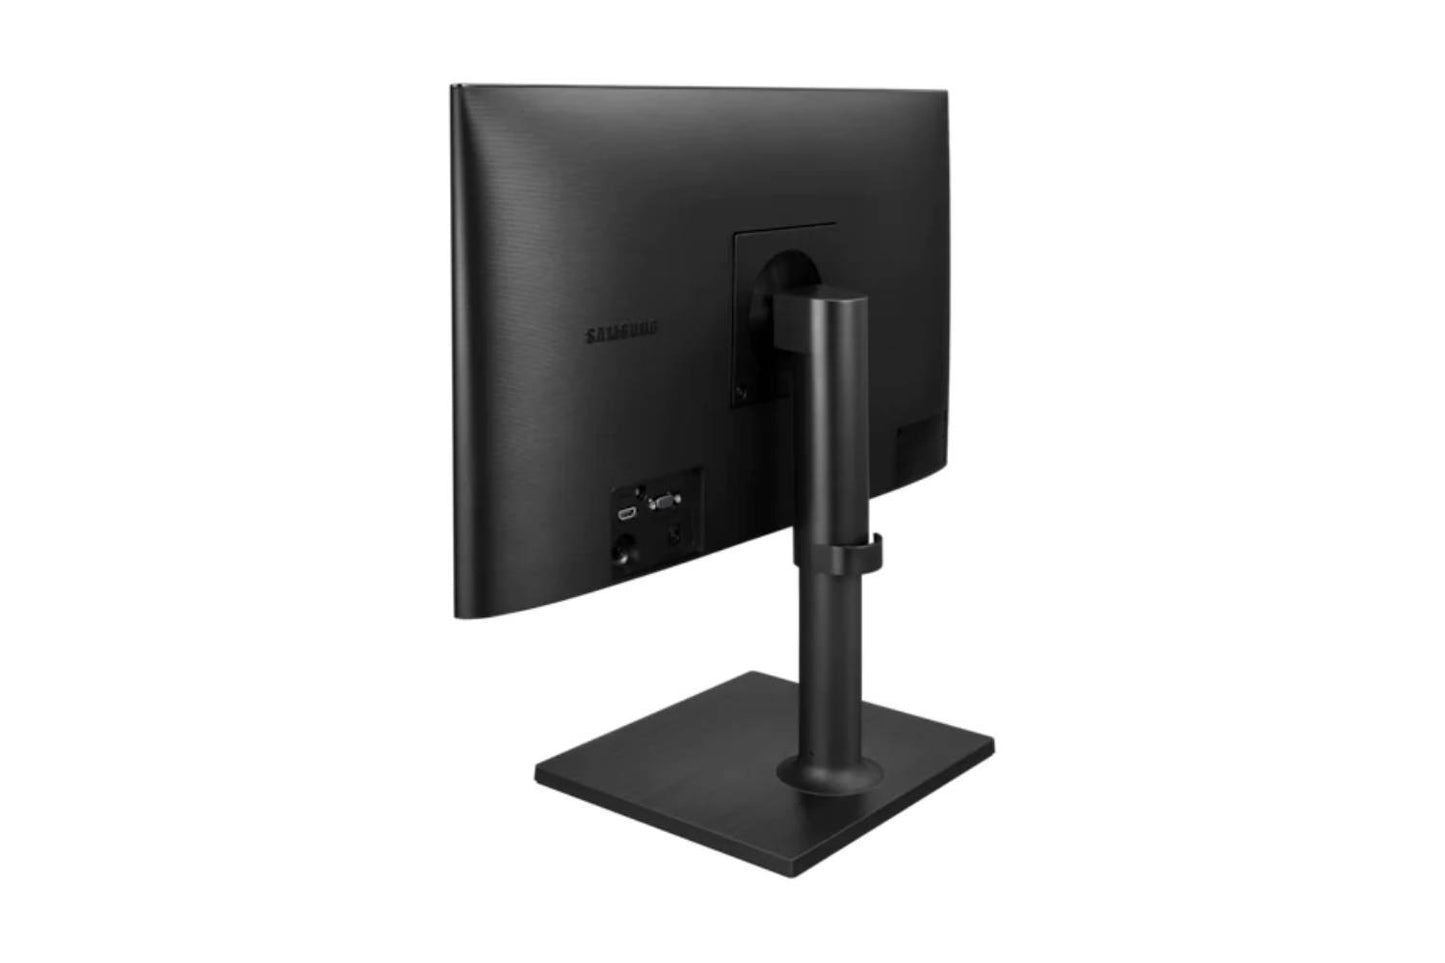 Samsung 24" (inch) Professional Monitor with IPS panel and adjustable design